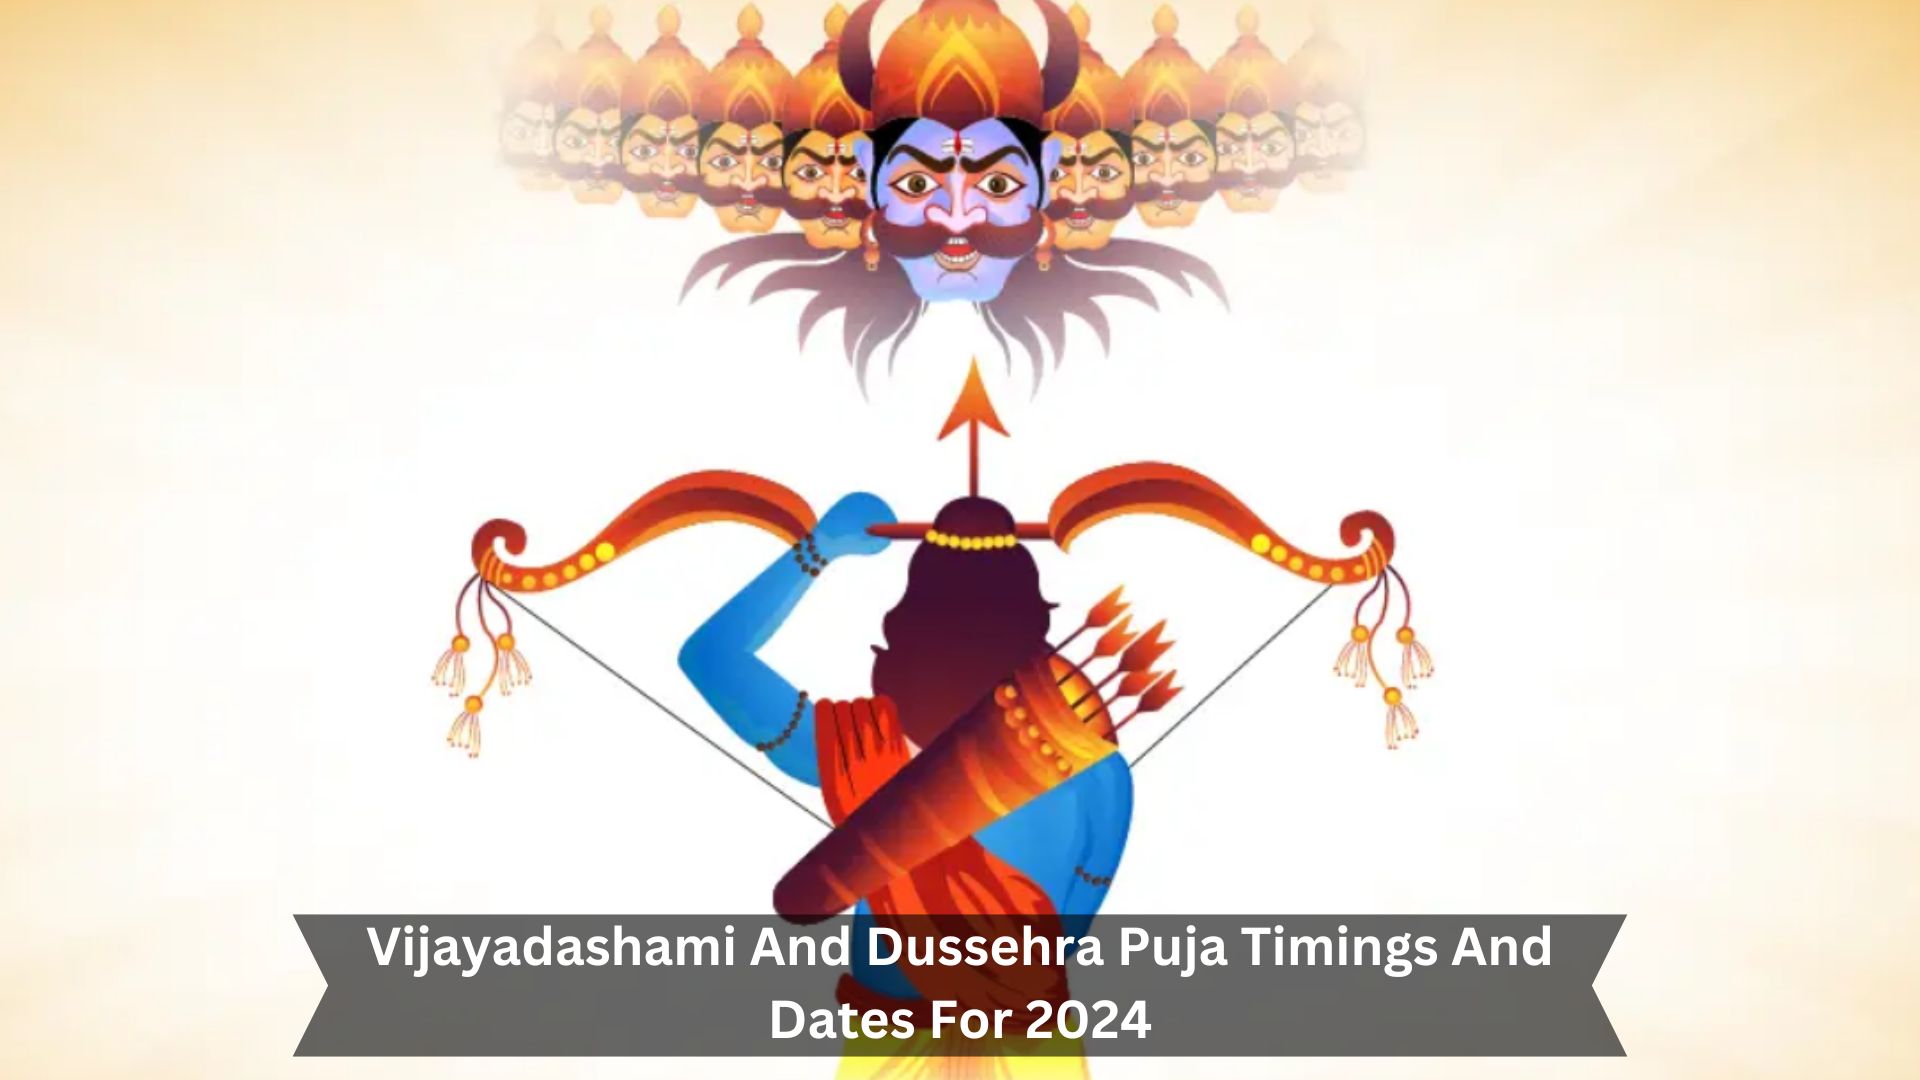 Vijayadashami-And-Dussehra-Puja-Timings-And-Dates-For-2024